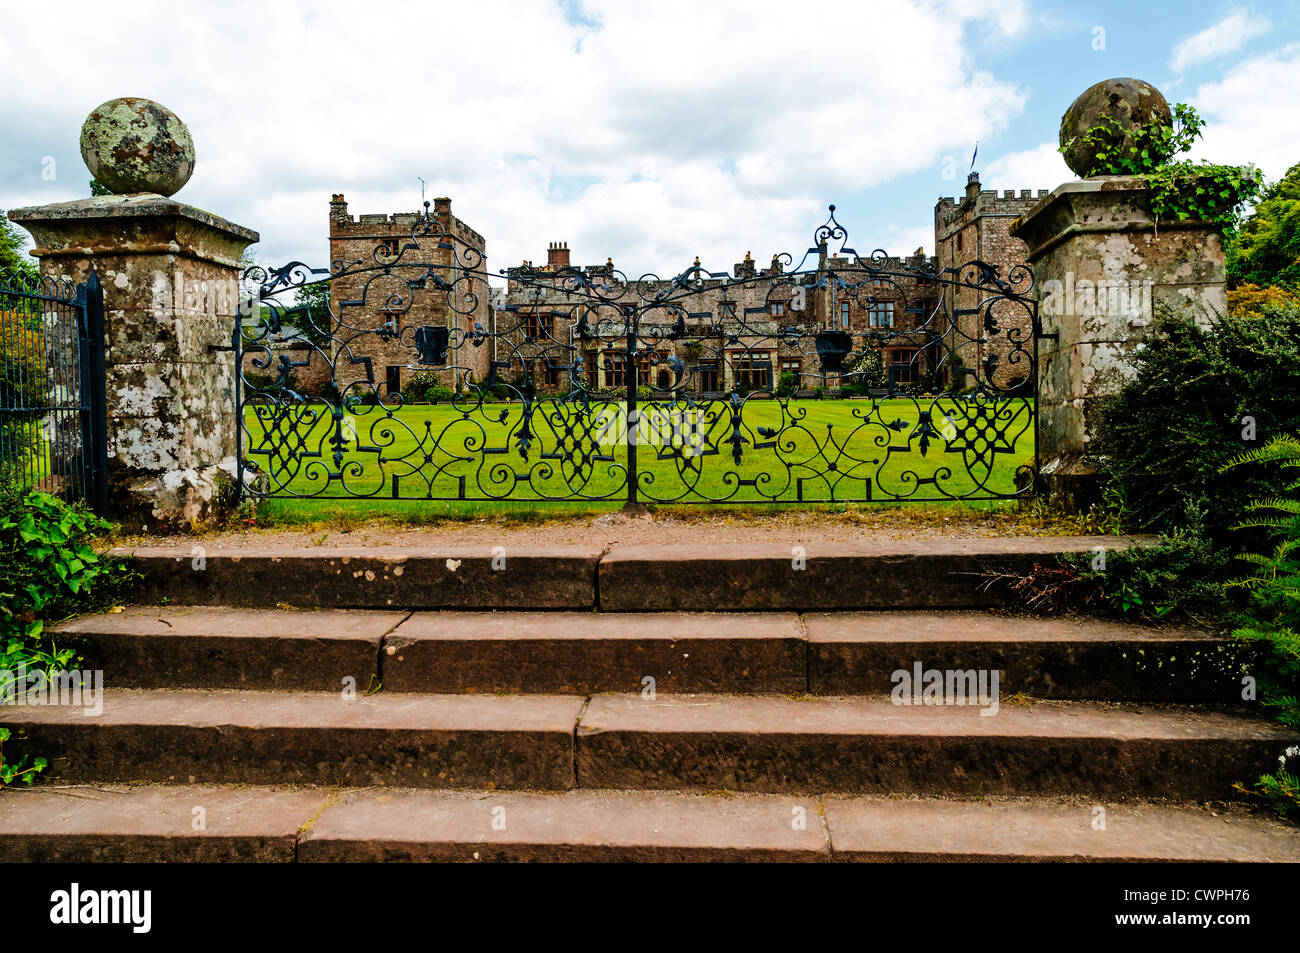 The lawn and facade of Muncaster Castle with two crenelated square towers seen through the patterns of the wrought iron gates Stock Photo